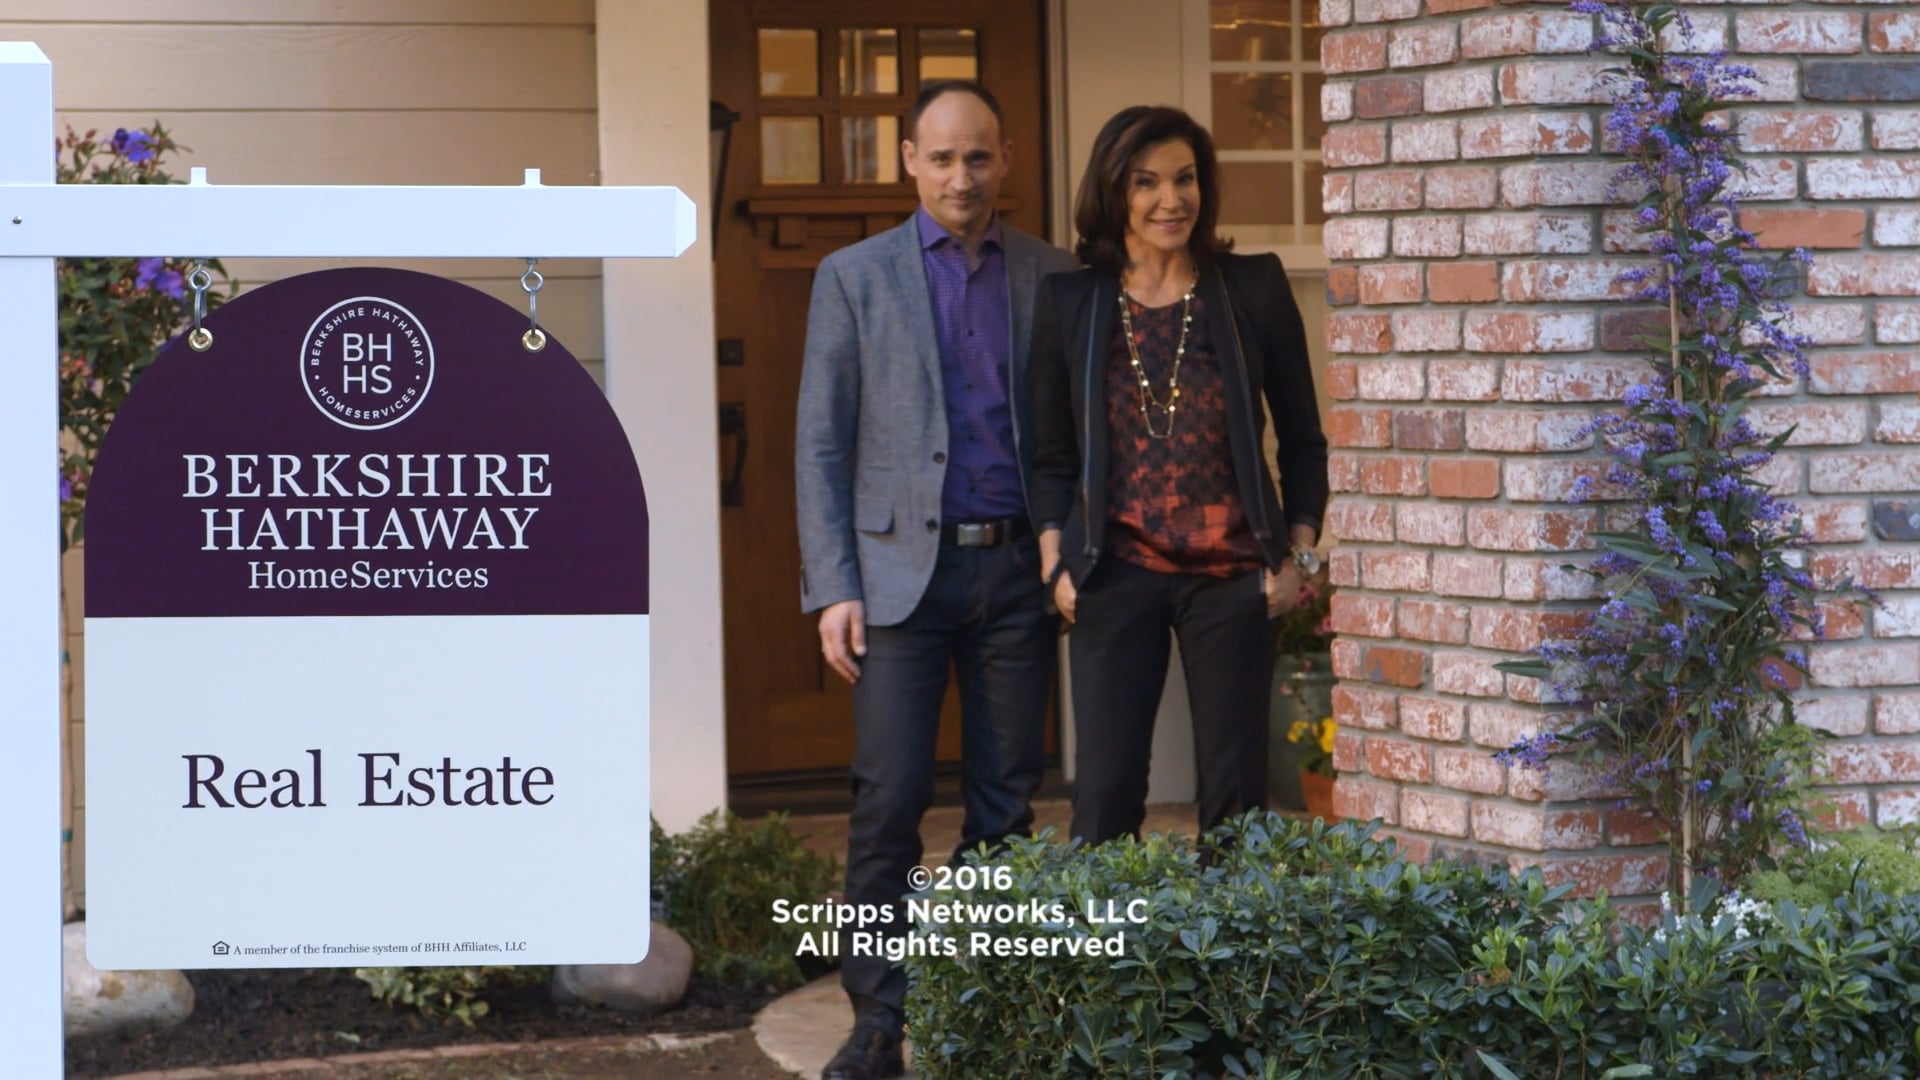 Berkshire Hathaway Hilary Farr & David Visentin "Love Your Home" (Sweeps: Interior & Exterior) - Red Arrow Industries